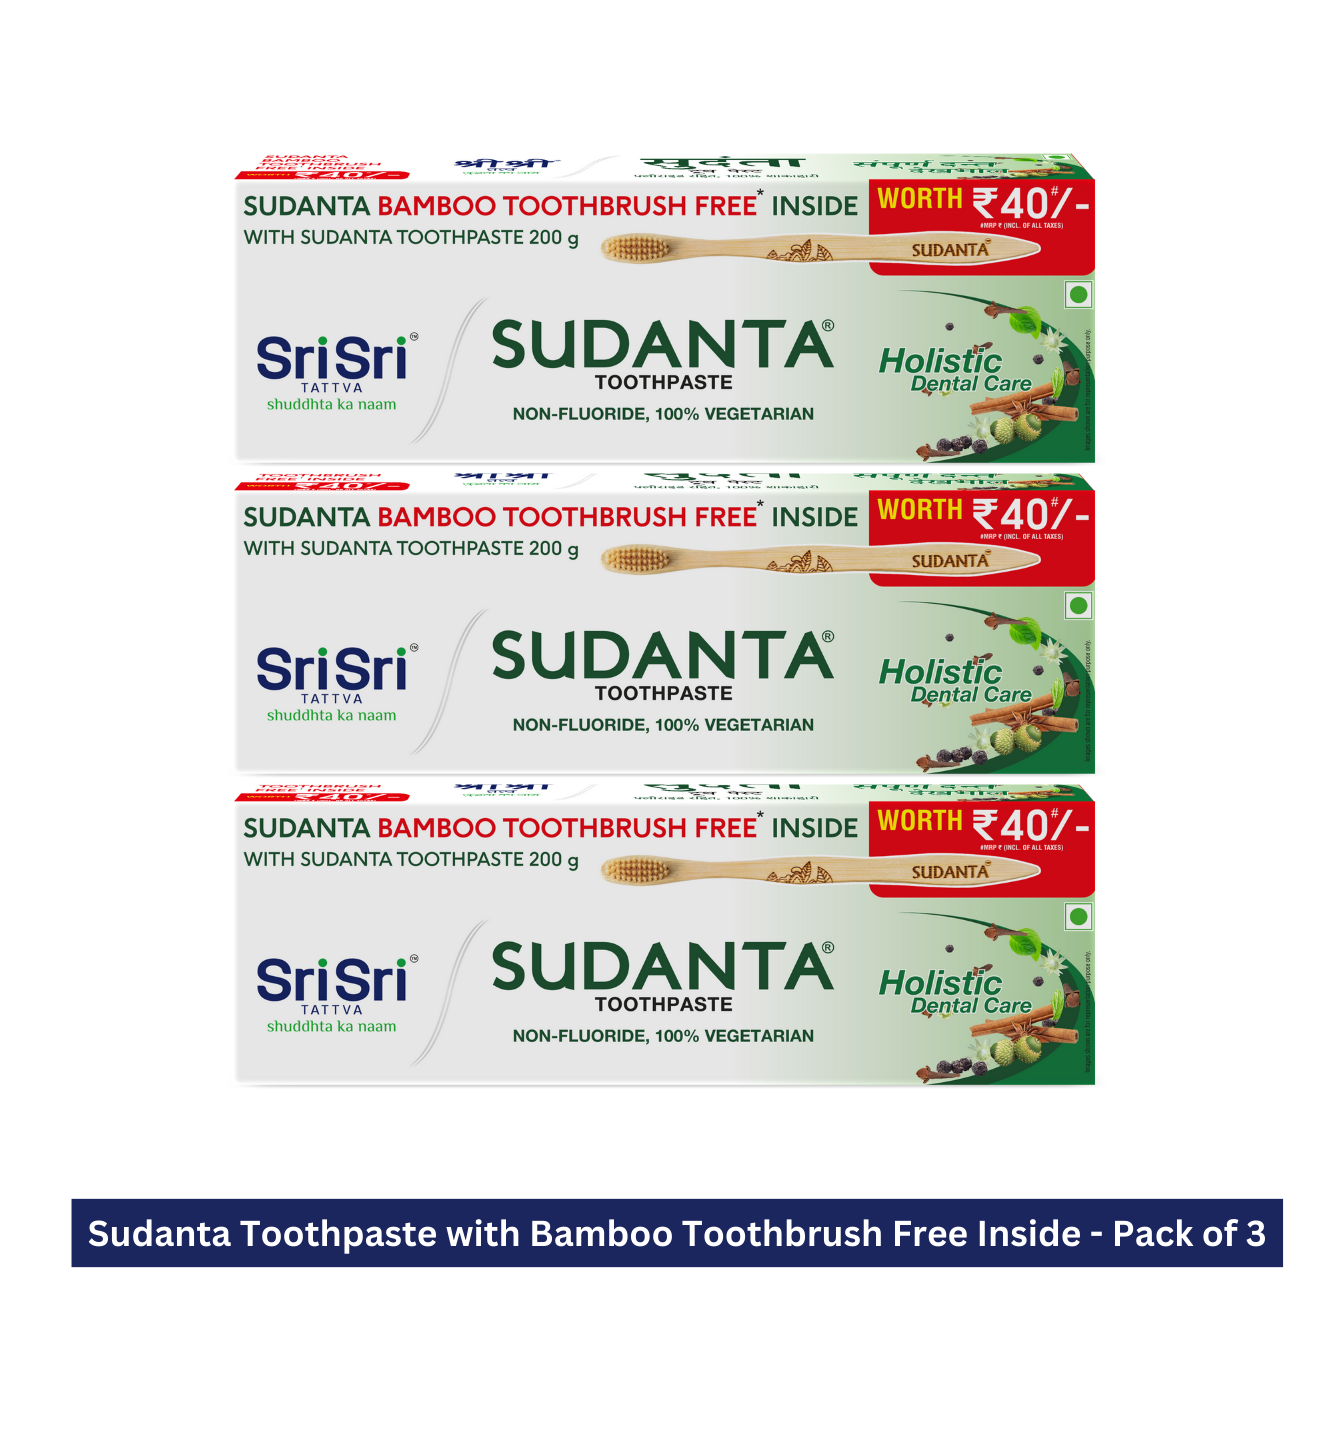 Sudanta Toothpaste -  Non - Fluoride - 100% Vegetarian, 200 g with Bamboo Toothbrush Free Inside - Pack of 3